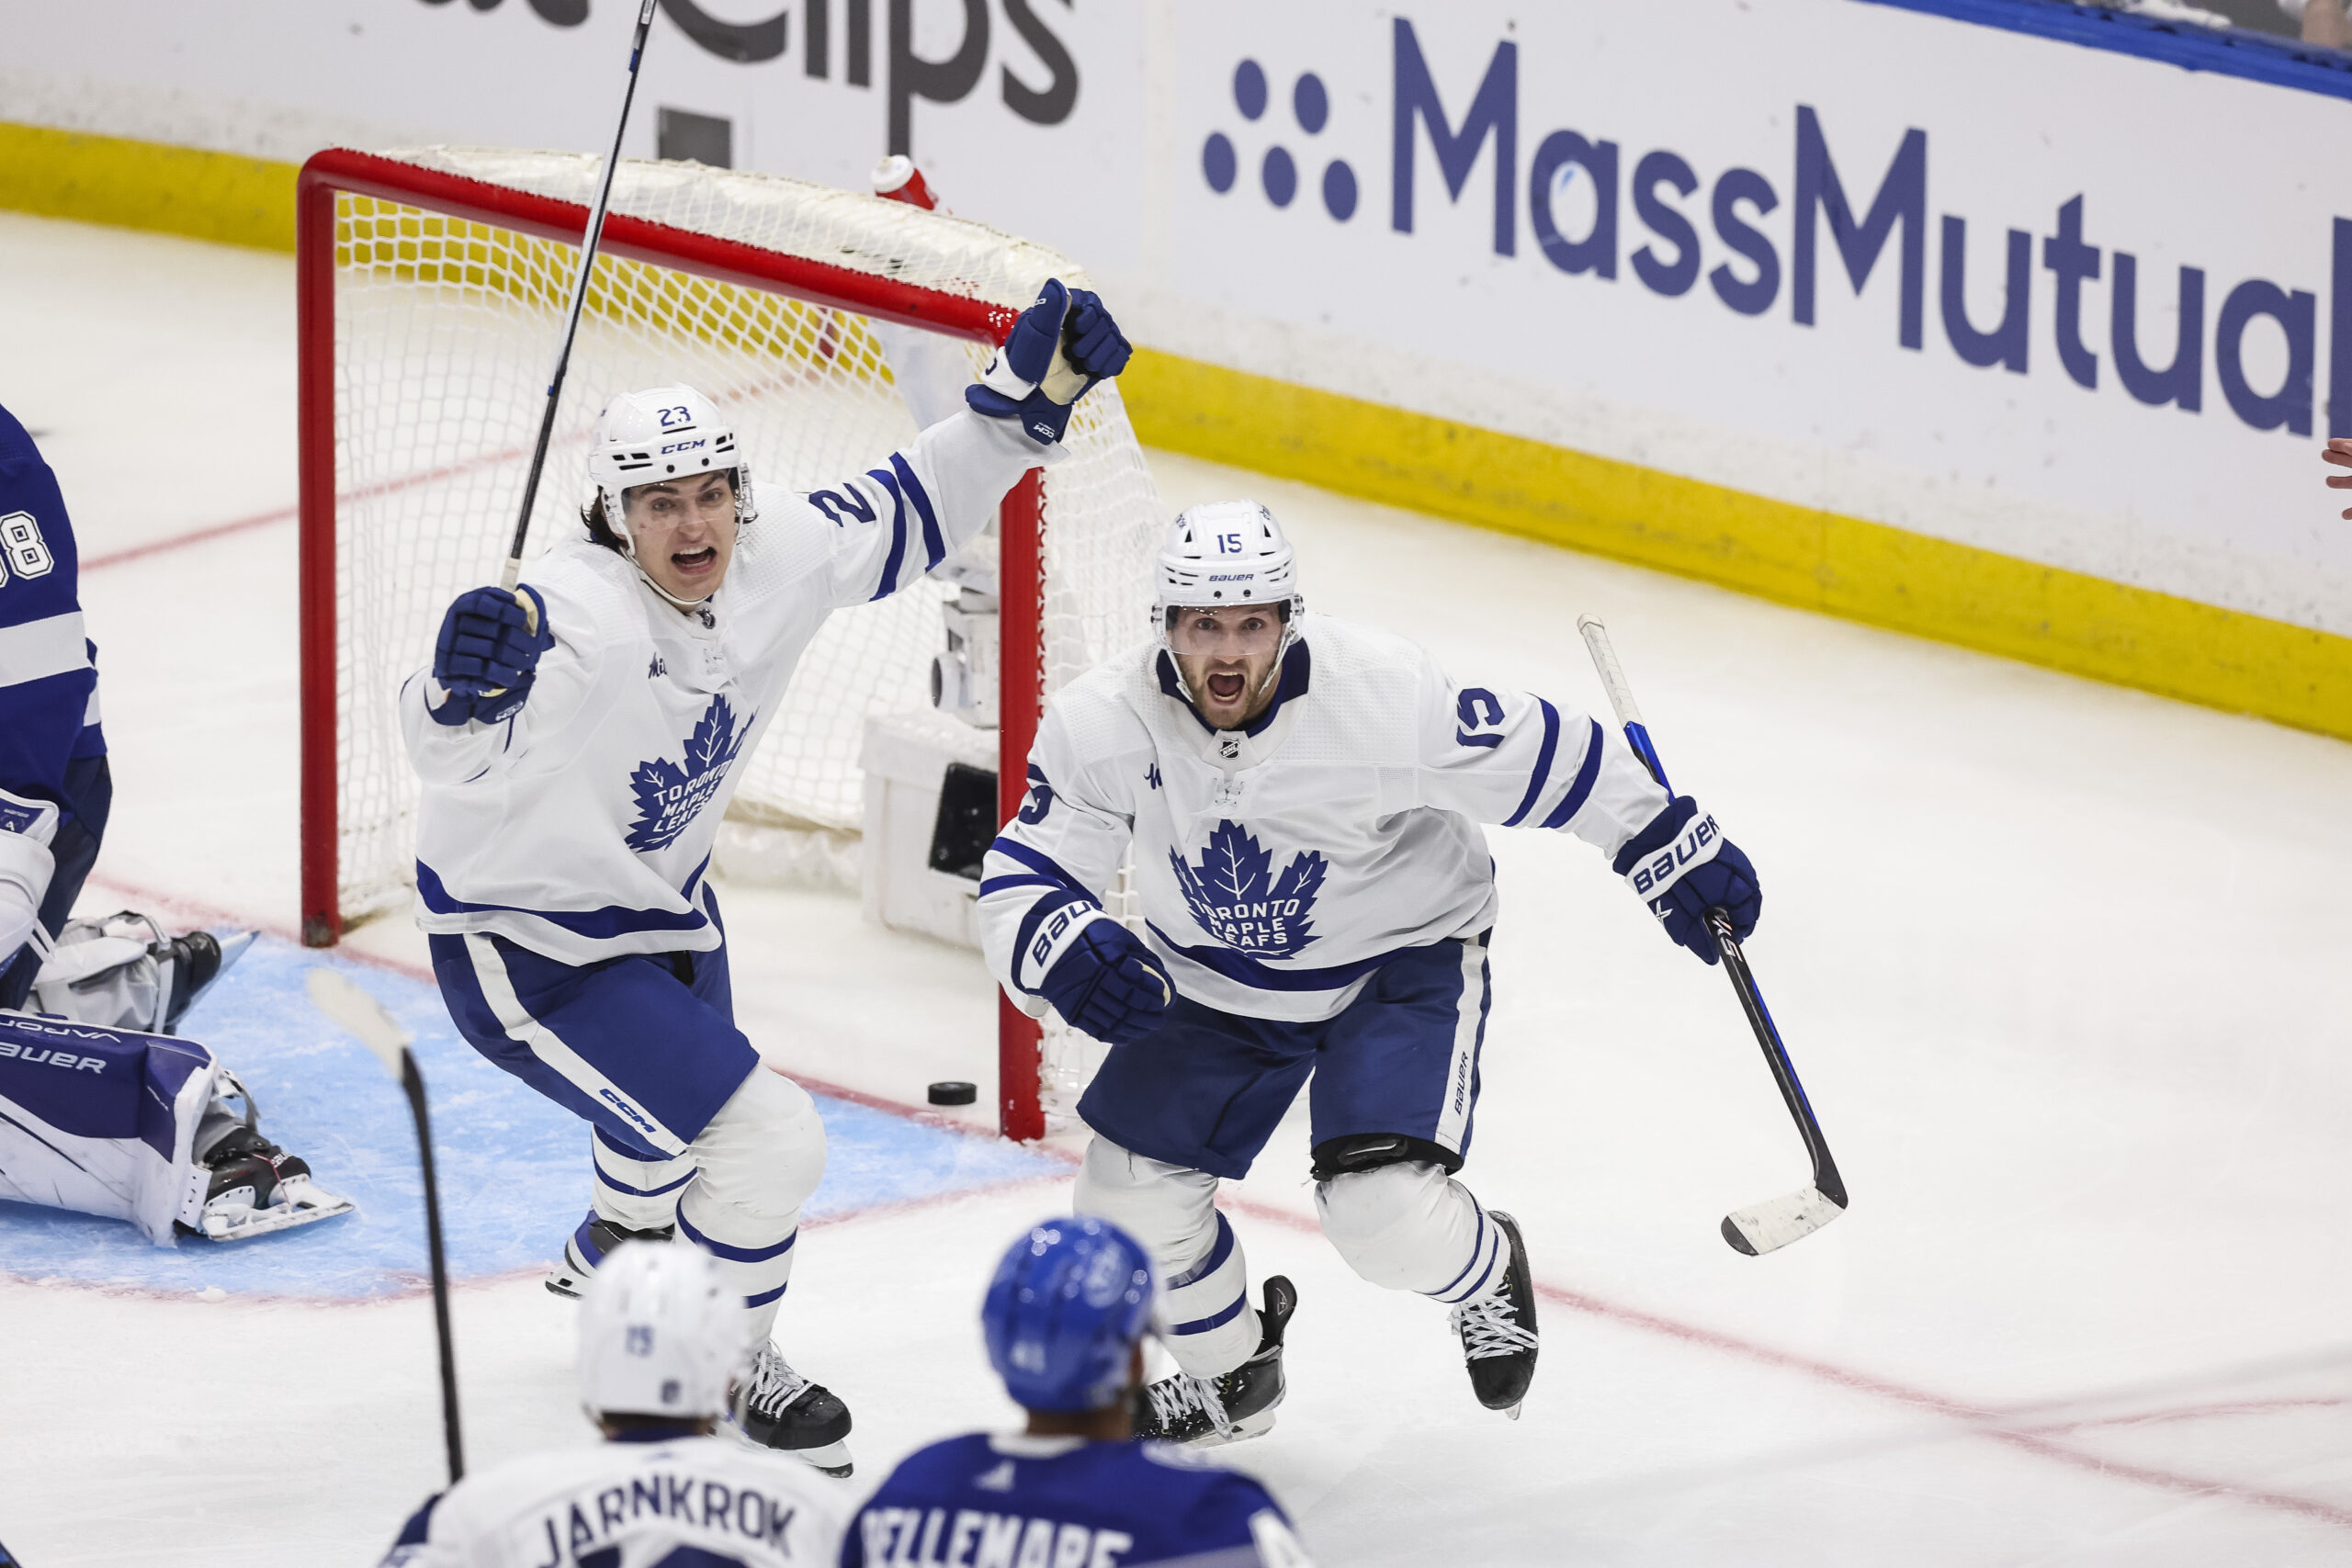 NHL playoffs: Devils-Rangers, Bolts-Leafs highlight openers - The